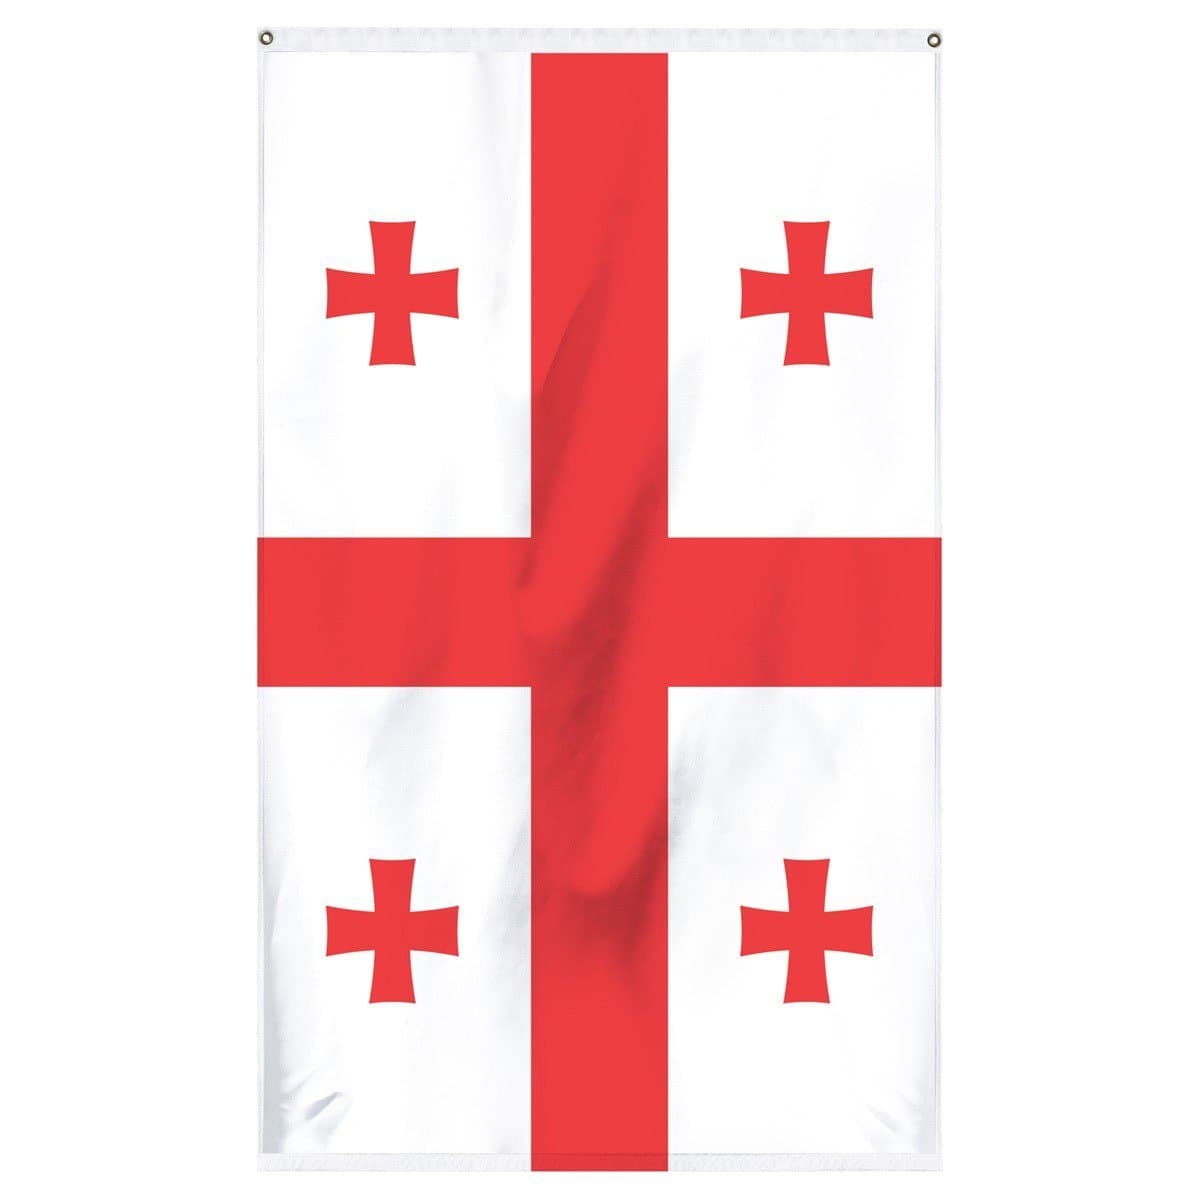 the official UN approved flag of the Georgia Republic for sale to buy online